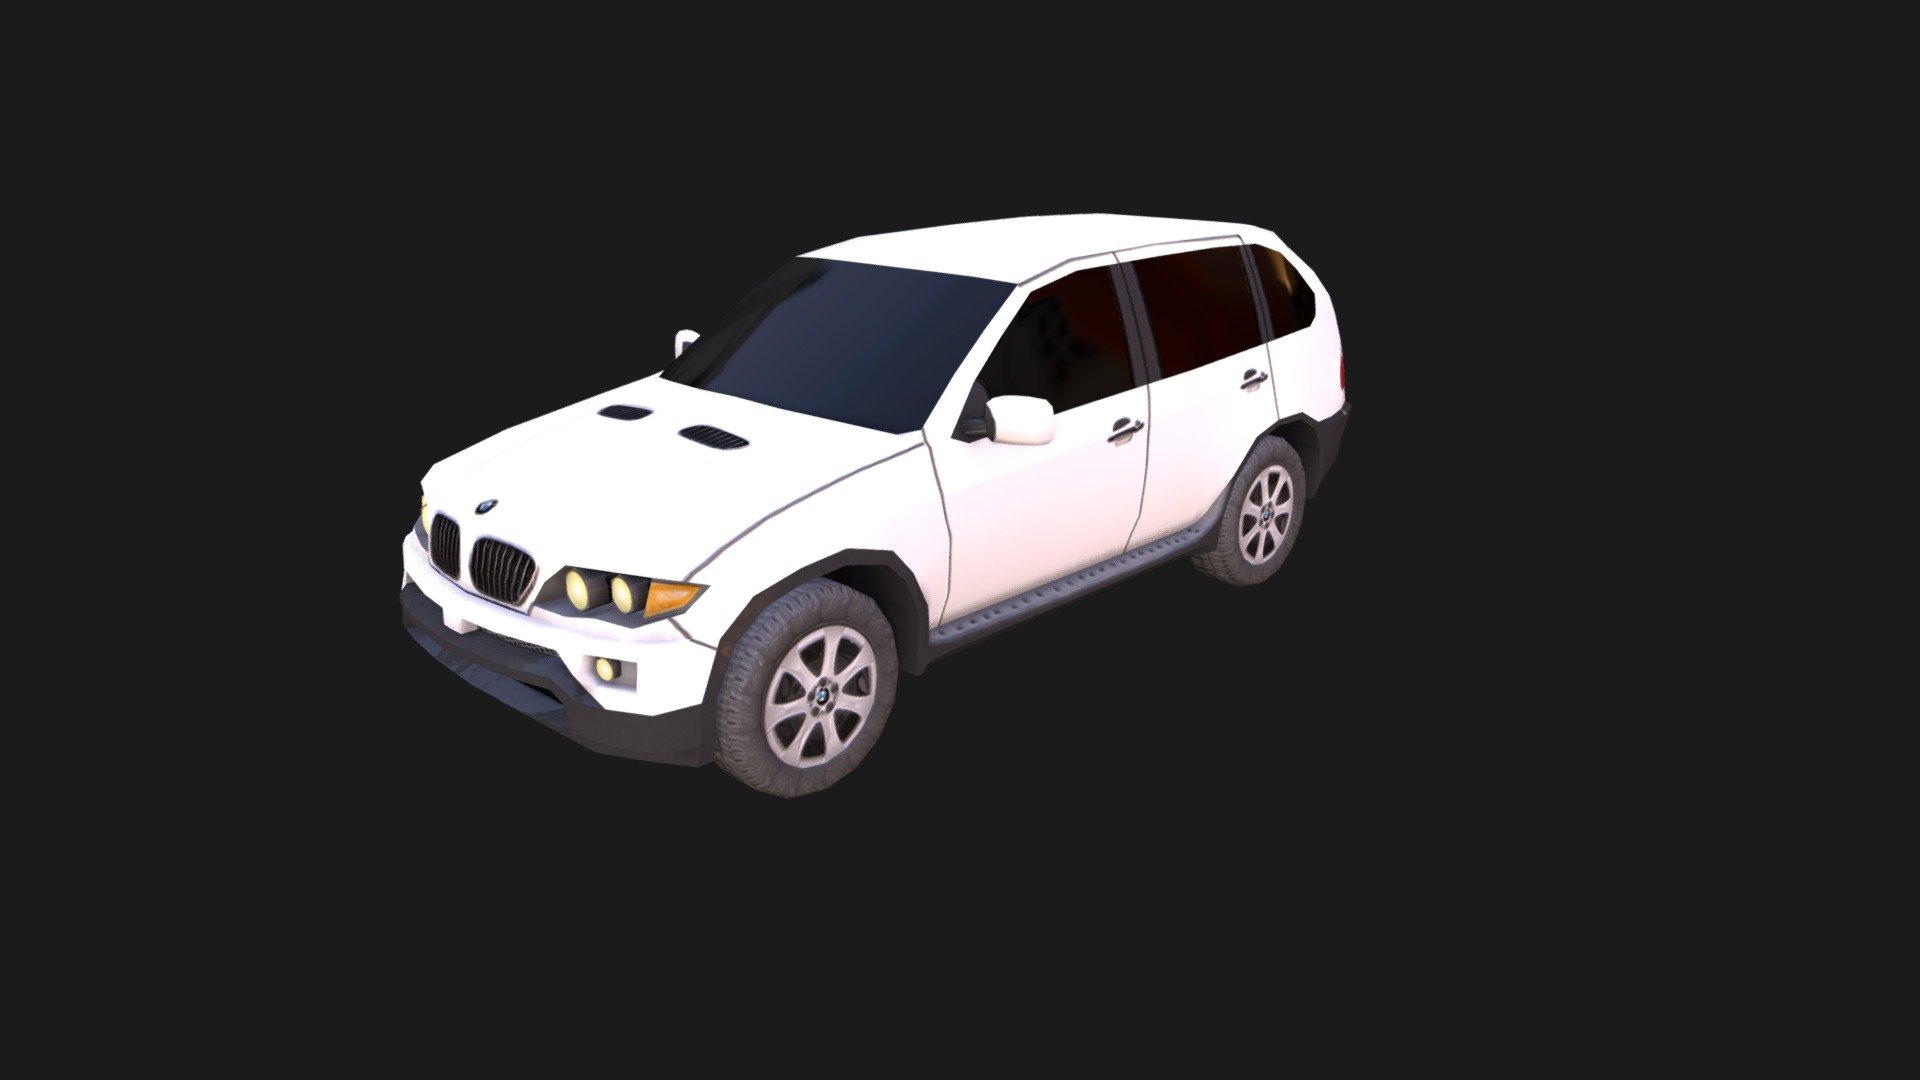 BMW X5 (2004) model i made for cities skylines.
i wanted to keep it low poly but i kind of went overboard on this one 3d model